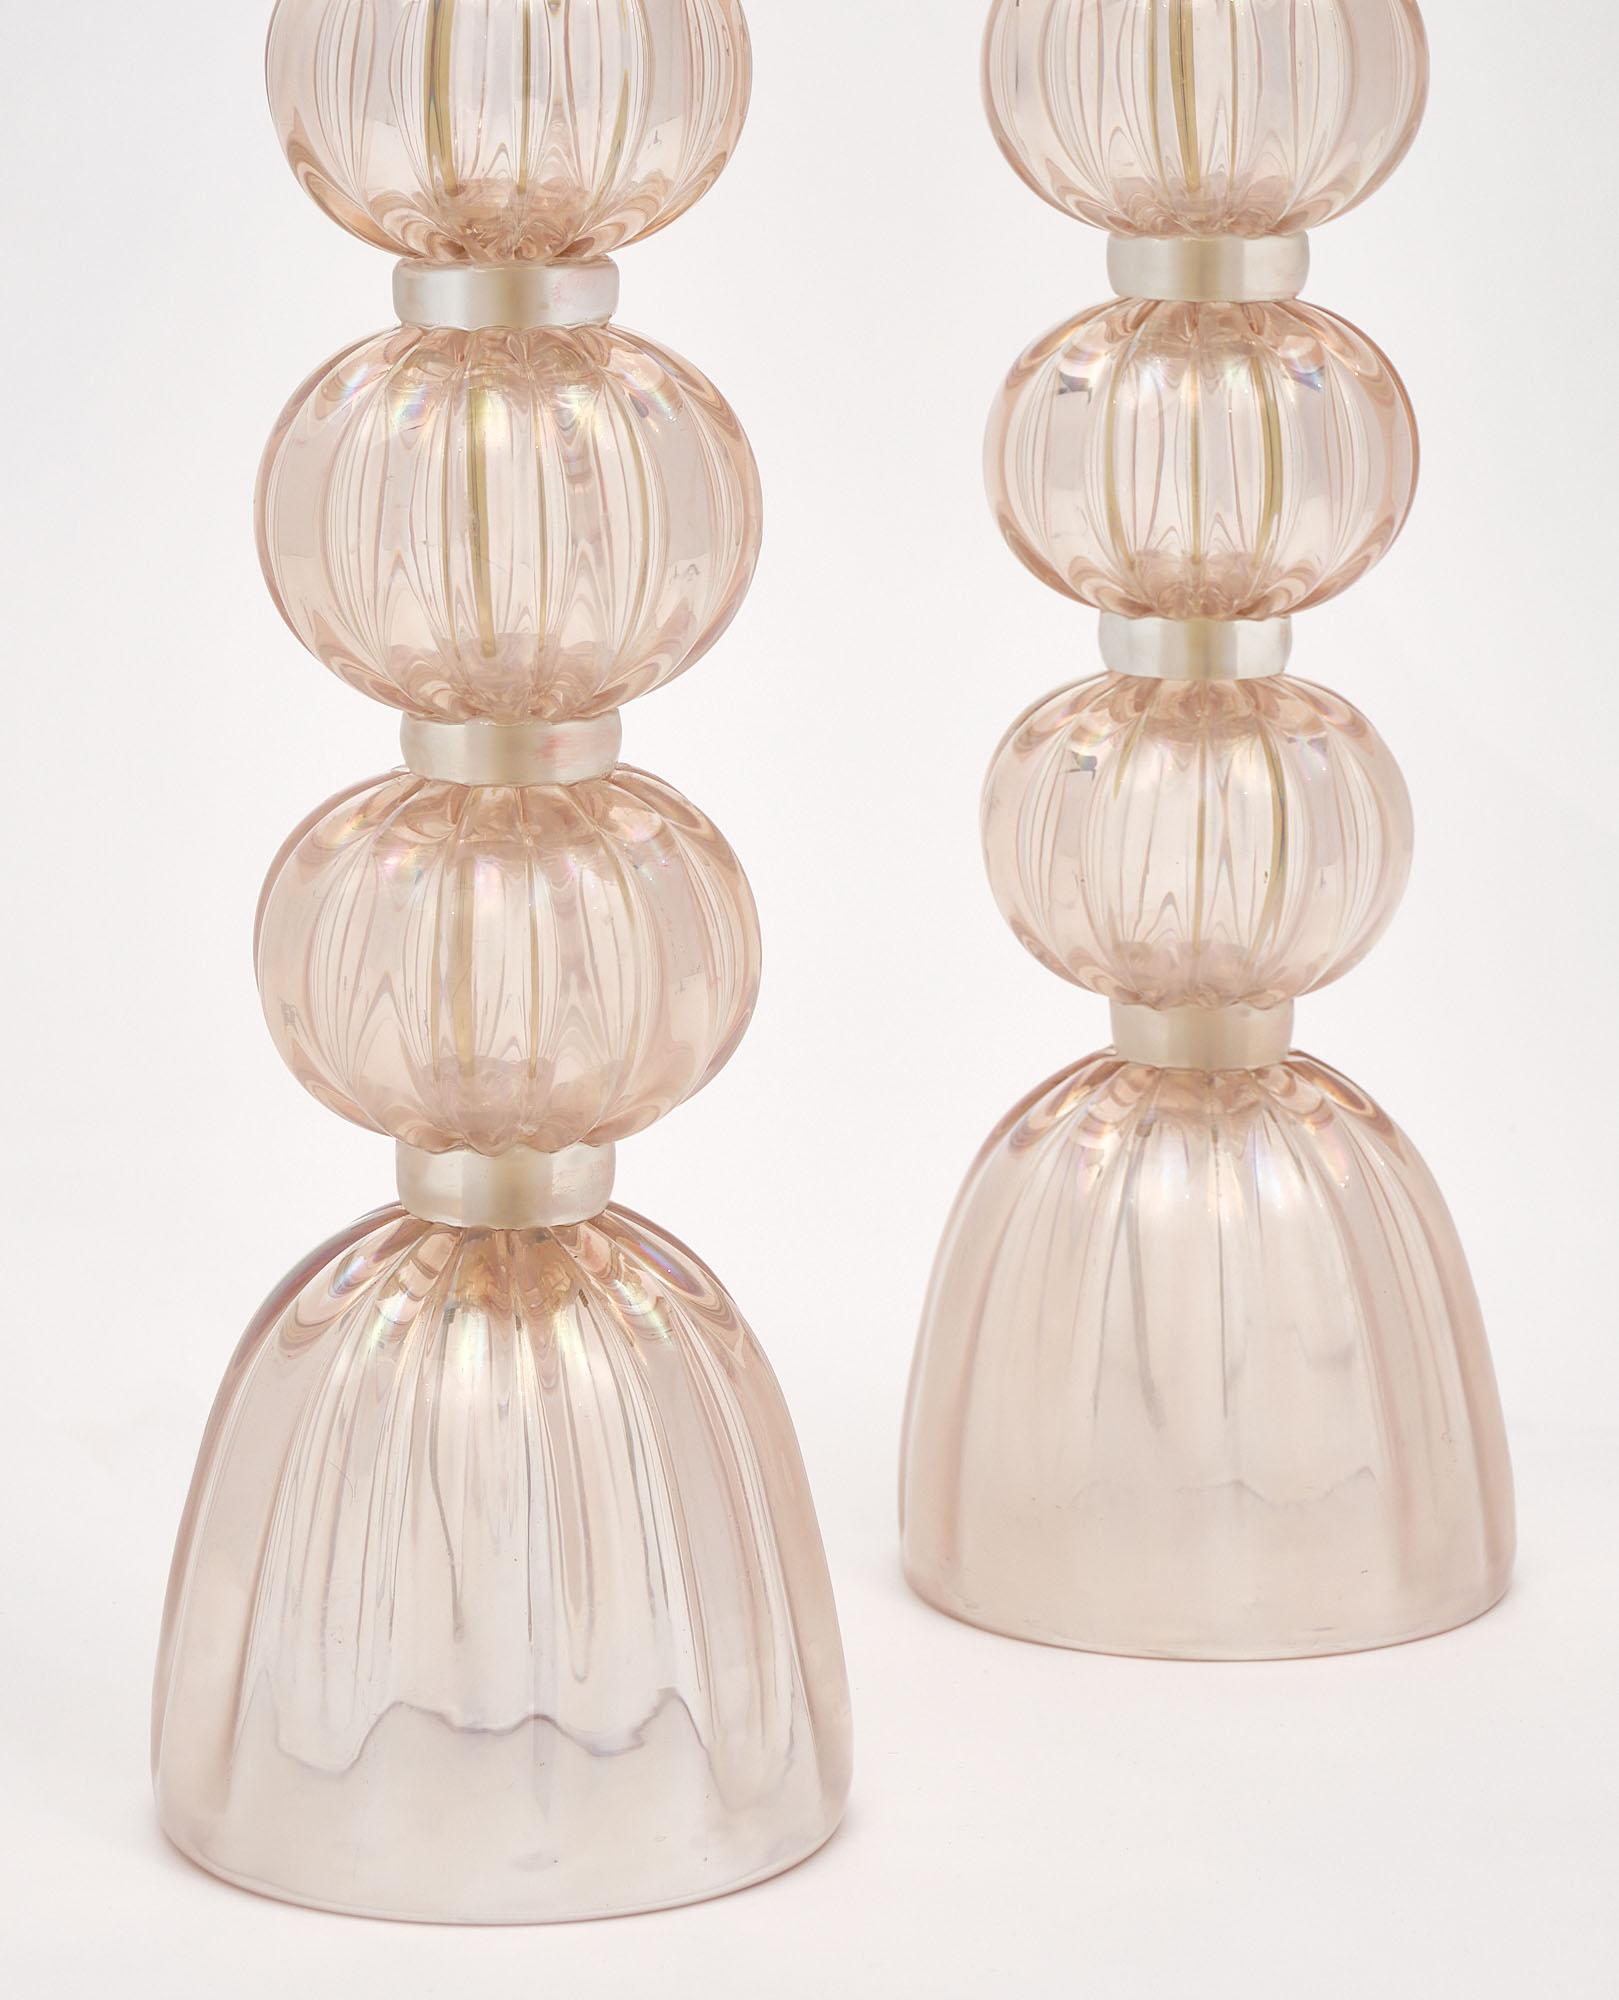 Pair of lamps from Murano; Italy made of hand-blown iridescent pink glass. They have been newly wired to fit US standards.

This pair is a special order from Italy. Please contact us for a lead time. 